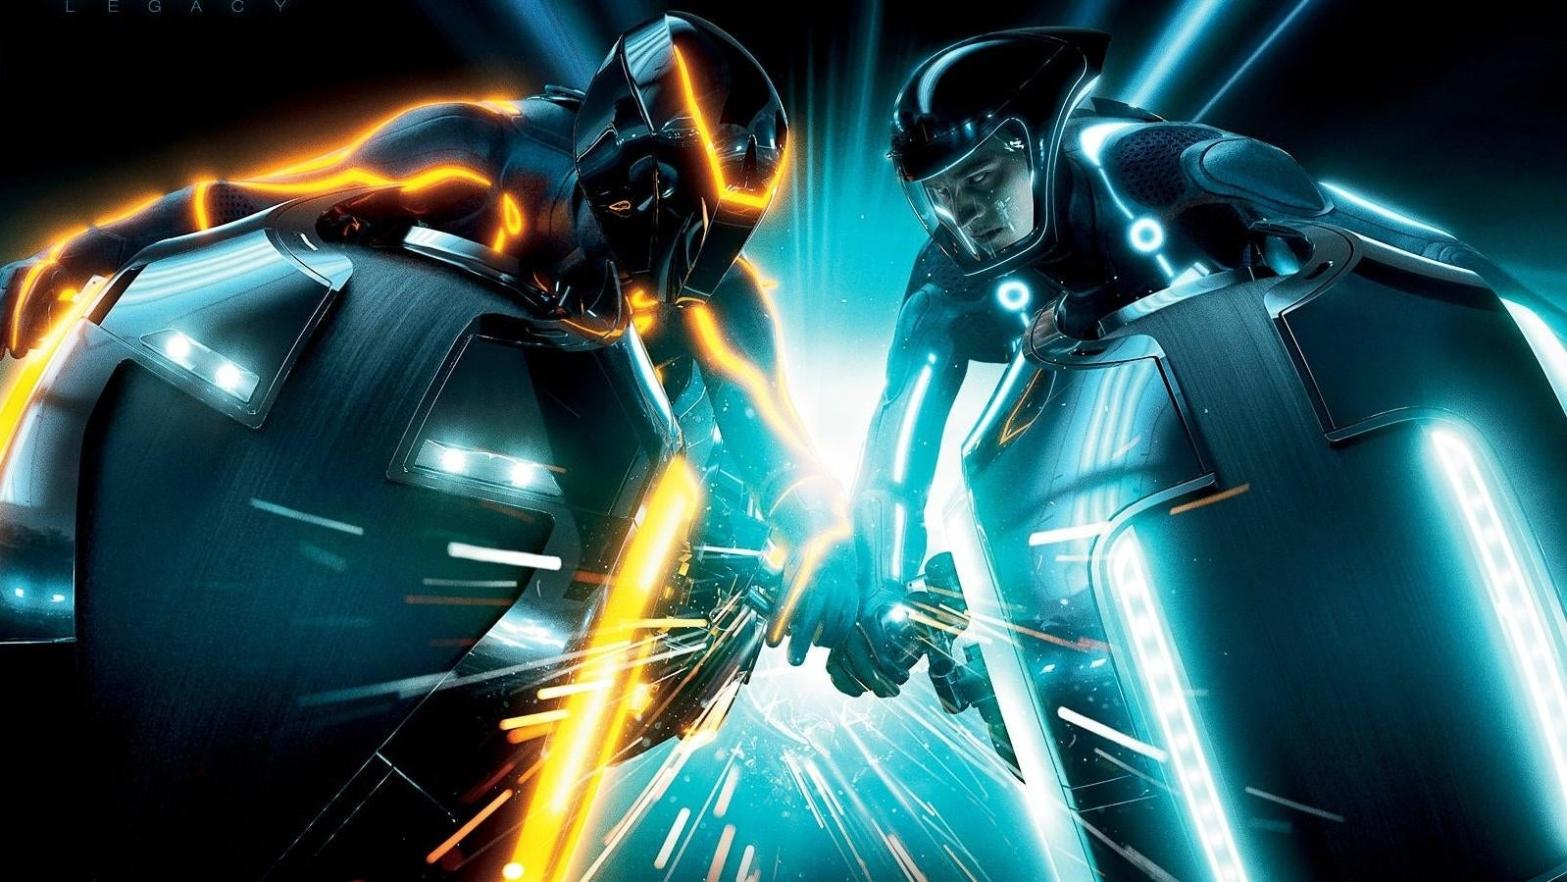 The race for Tron 3 has been an epic lightcycle race. (Image: Disney)